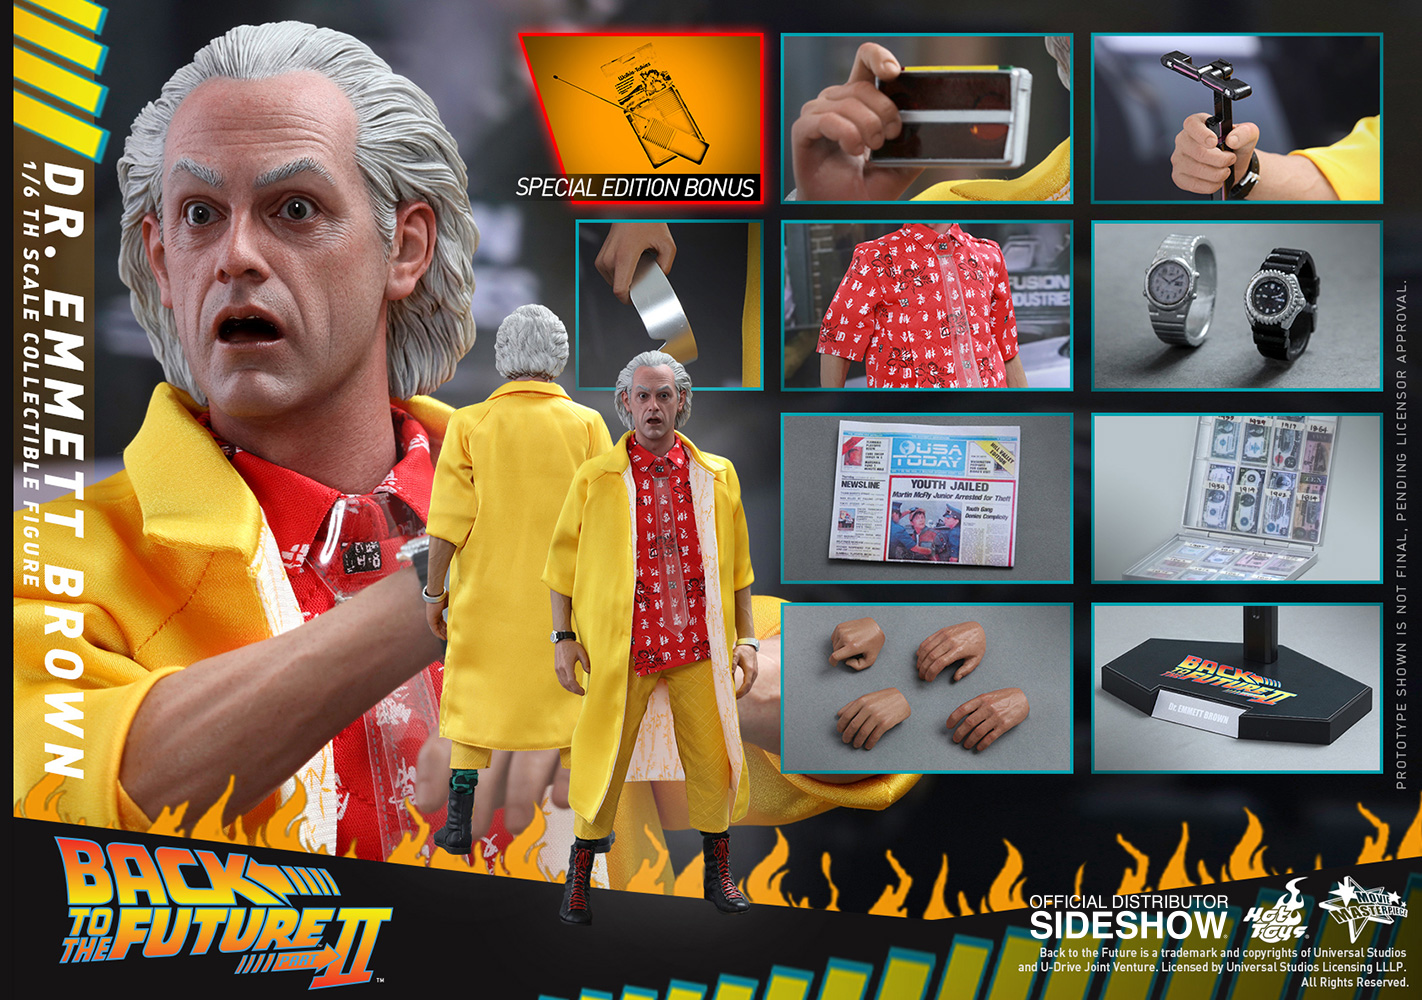 back-to-the-future-2-dr-emmett-brown-sixth-scale-hot-toys-9027901-01.jpg